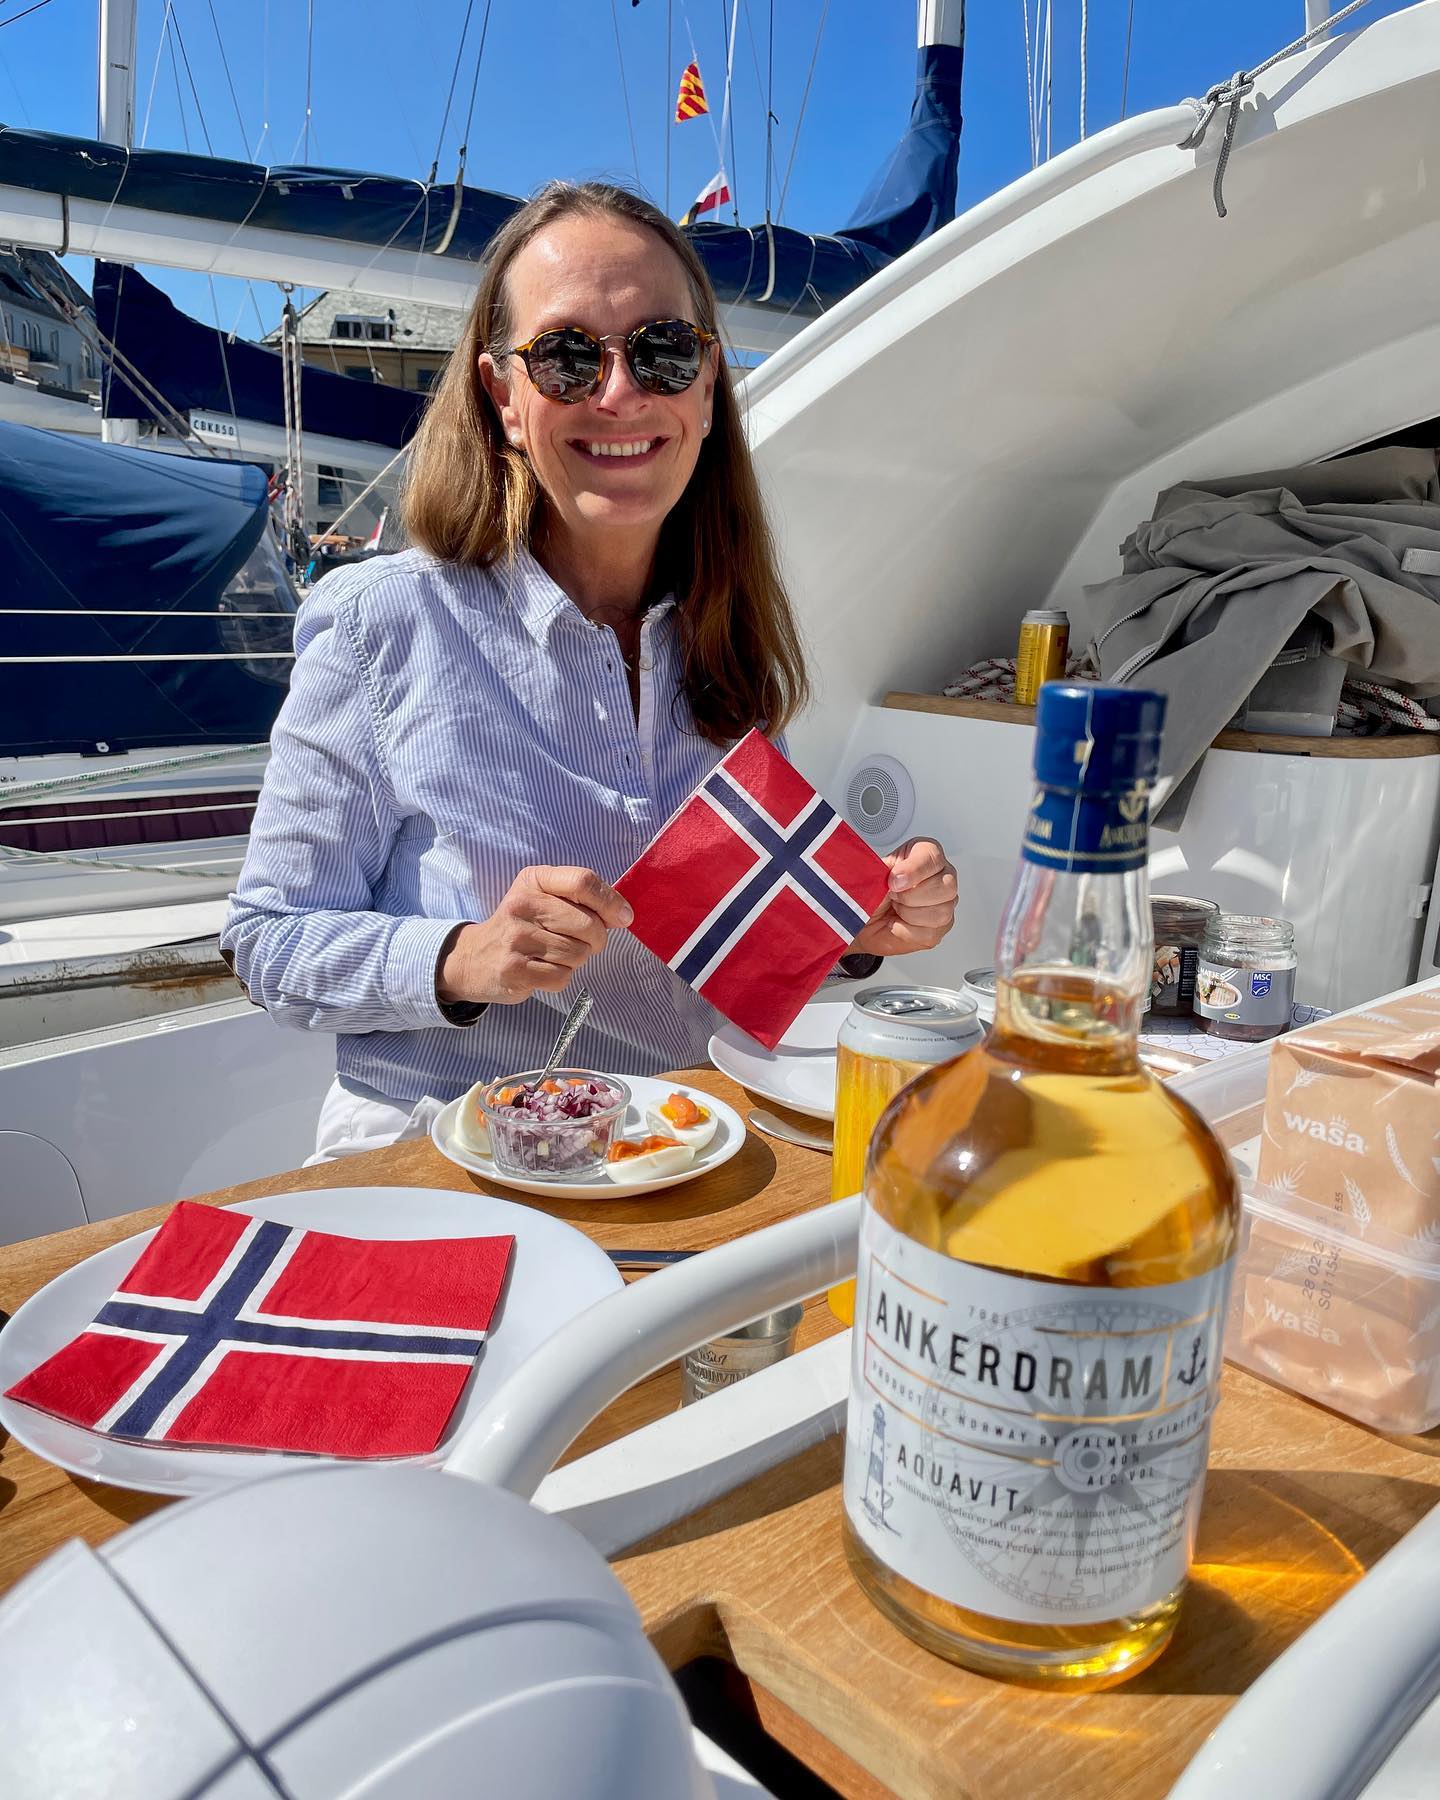 Gratulerer med dagen 🇳🇴 Helping our lovely neighbours to celebrate there national day in Ålesund 🇳🇴

#bushpoint #boreal #borealyacht #aluminiumsailboat #highlatitudesailboat #sail #sailing #sailingcouple #sailboatlife #yachtlife #sailinglife #sailinglifestyle #sailingadventure #adventure #travelbug #travelbysailingboat #cruising #spring #norway #alesund #ålesund #17mai